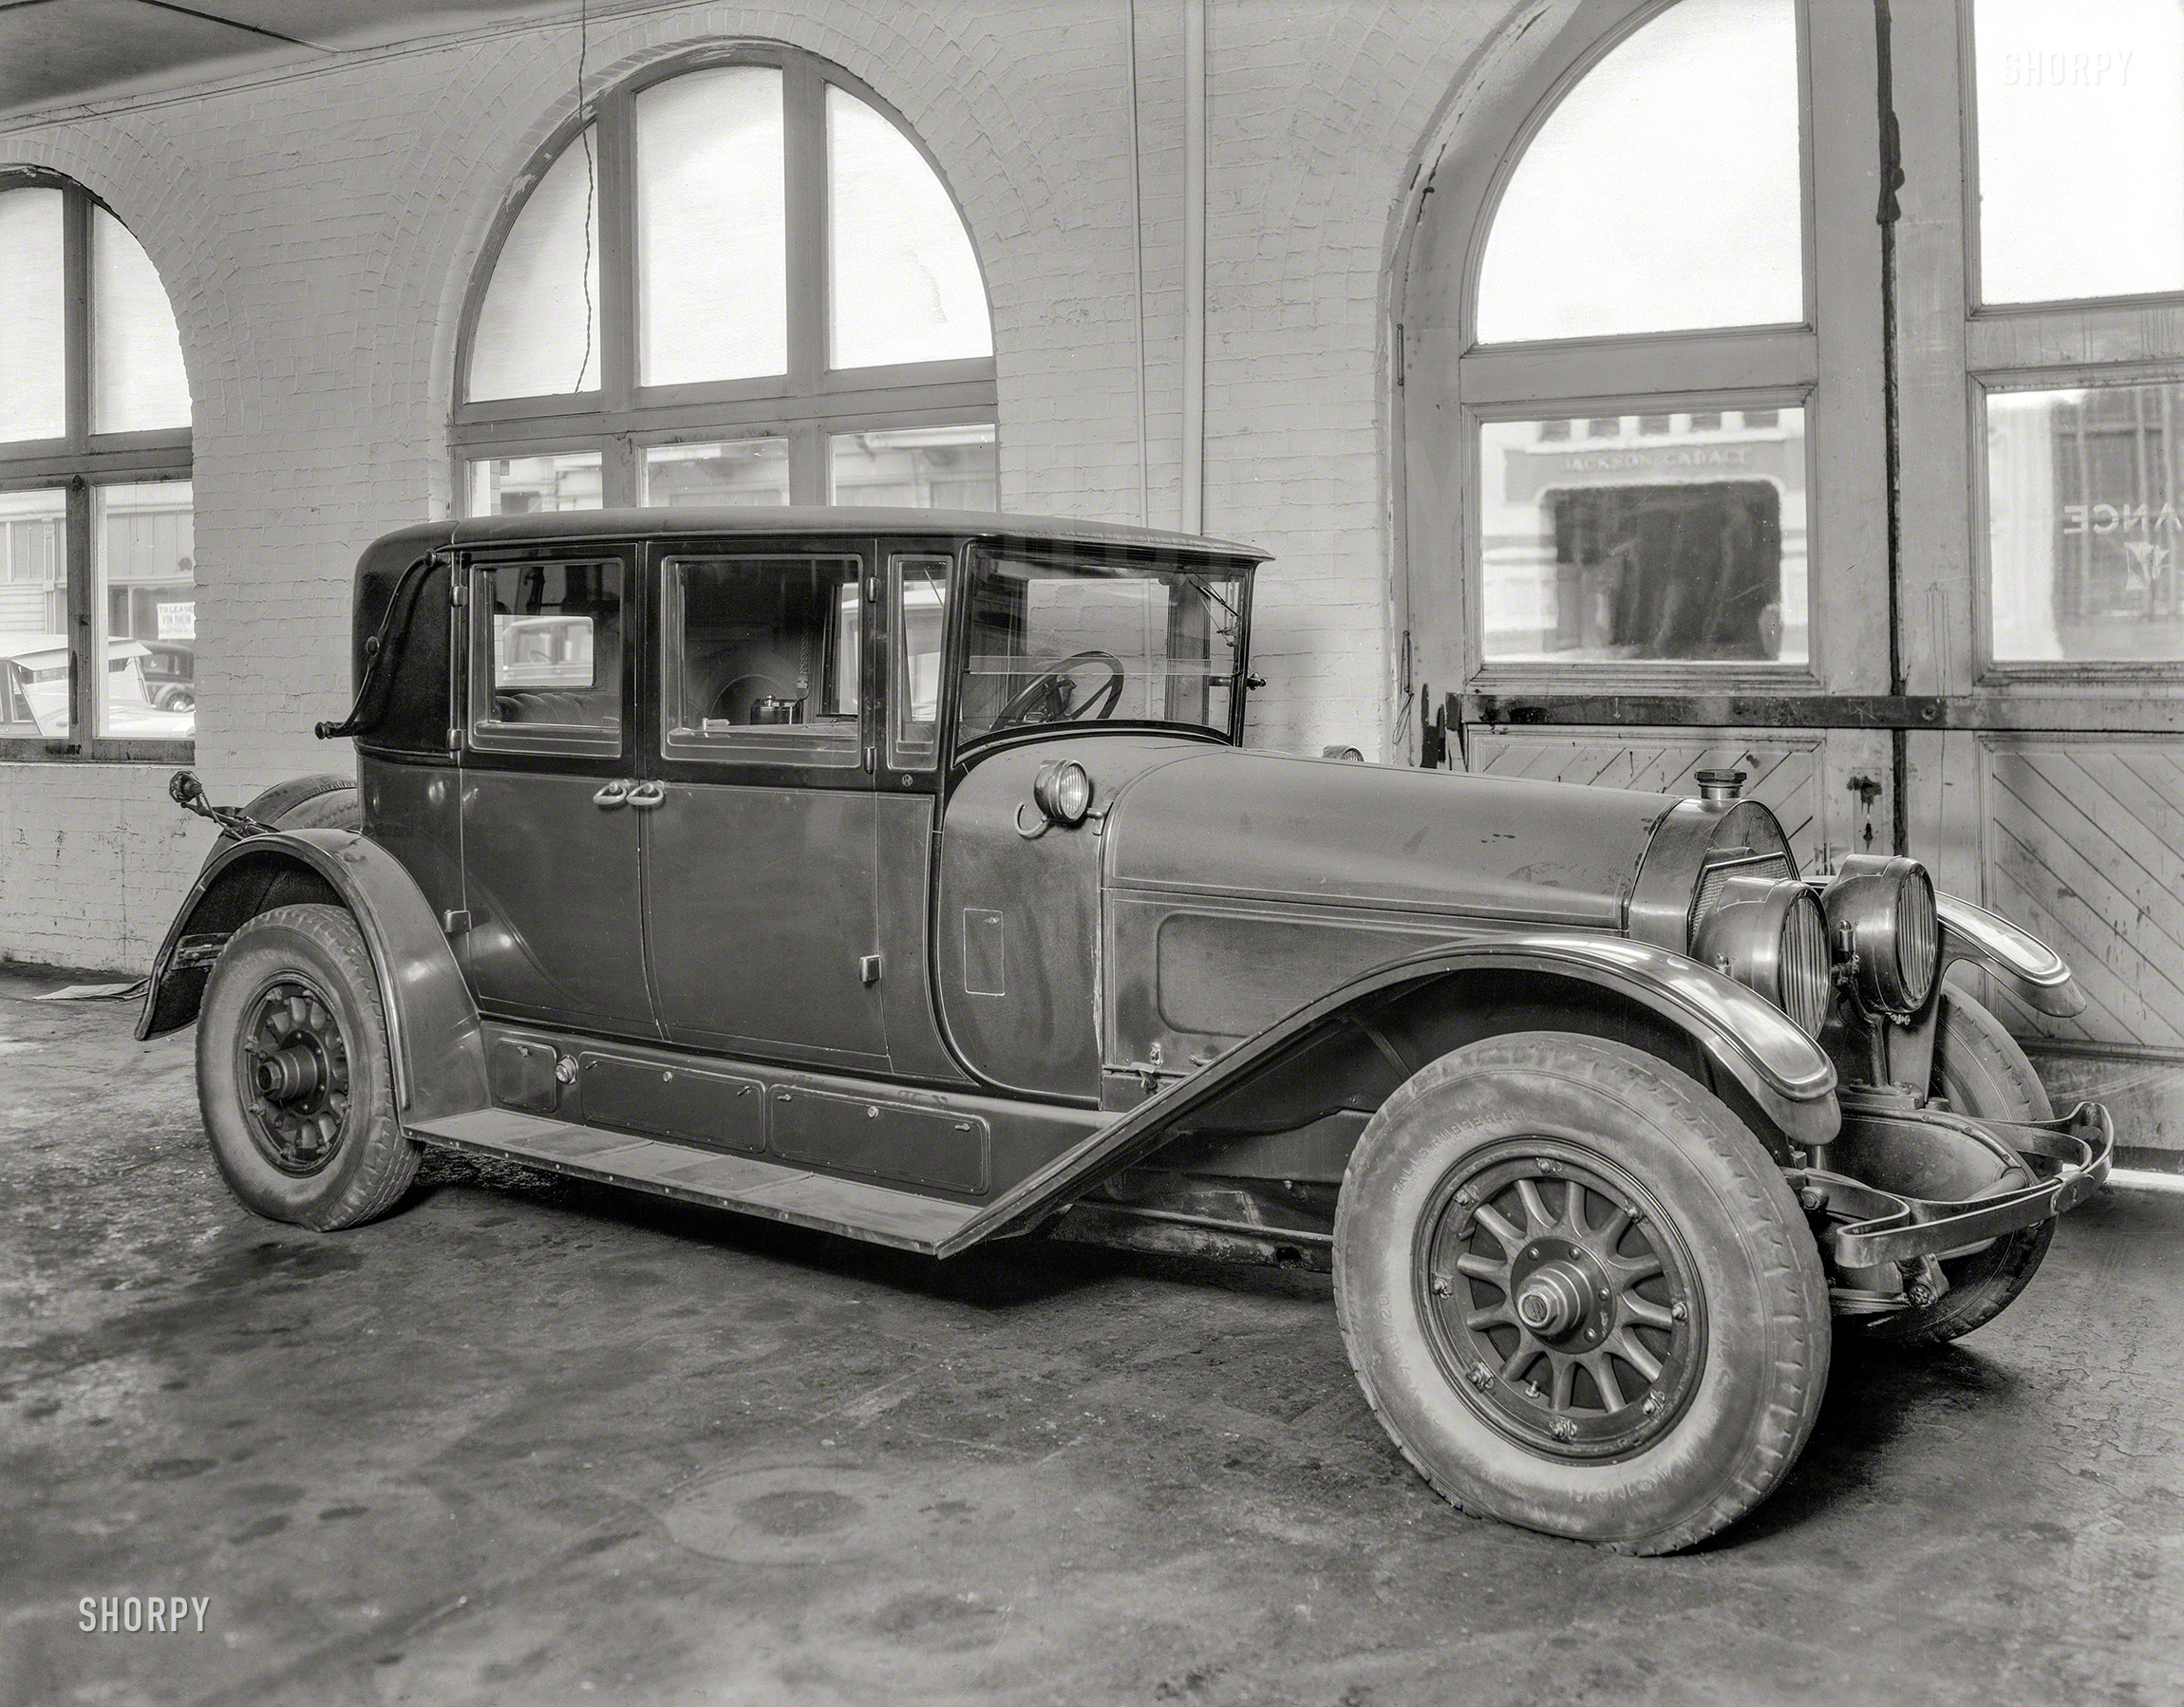 San Francisco circa 1930s. "Locomobile 90 Victoria Sedan." With a factory price of $7300, this giant Series 90 Victoria came at the end of the road for the revered Locomobile brand, whose last cars rolled off the assembly line in 1929. 8x10 inch acetate negative by Christopher Helin, scanned by Shorpy. View full size.